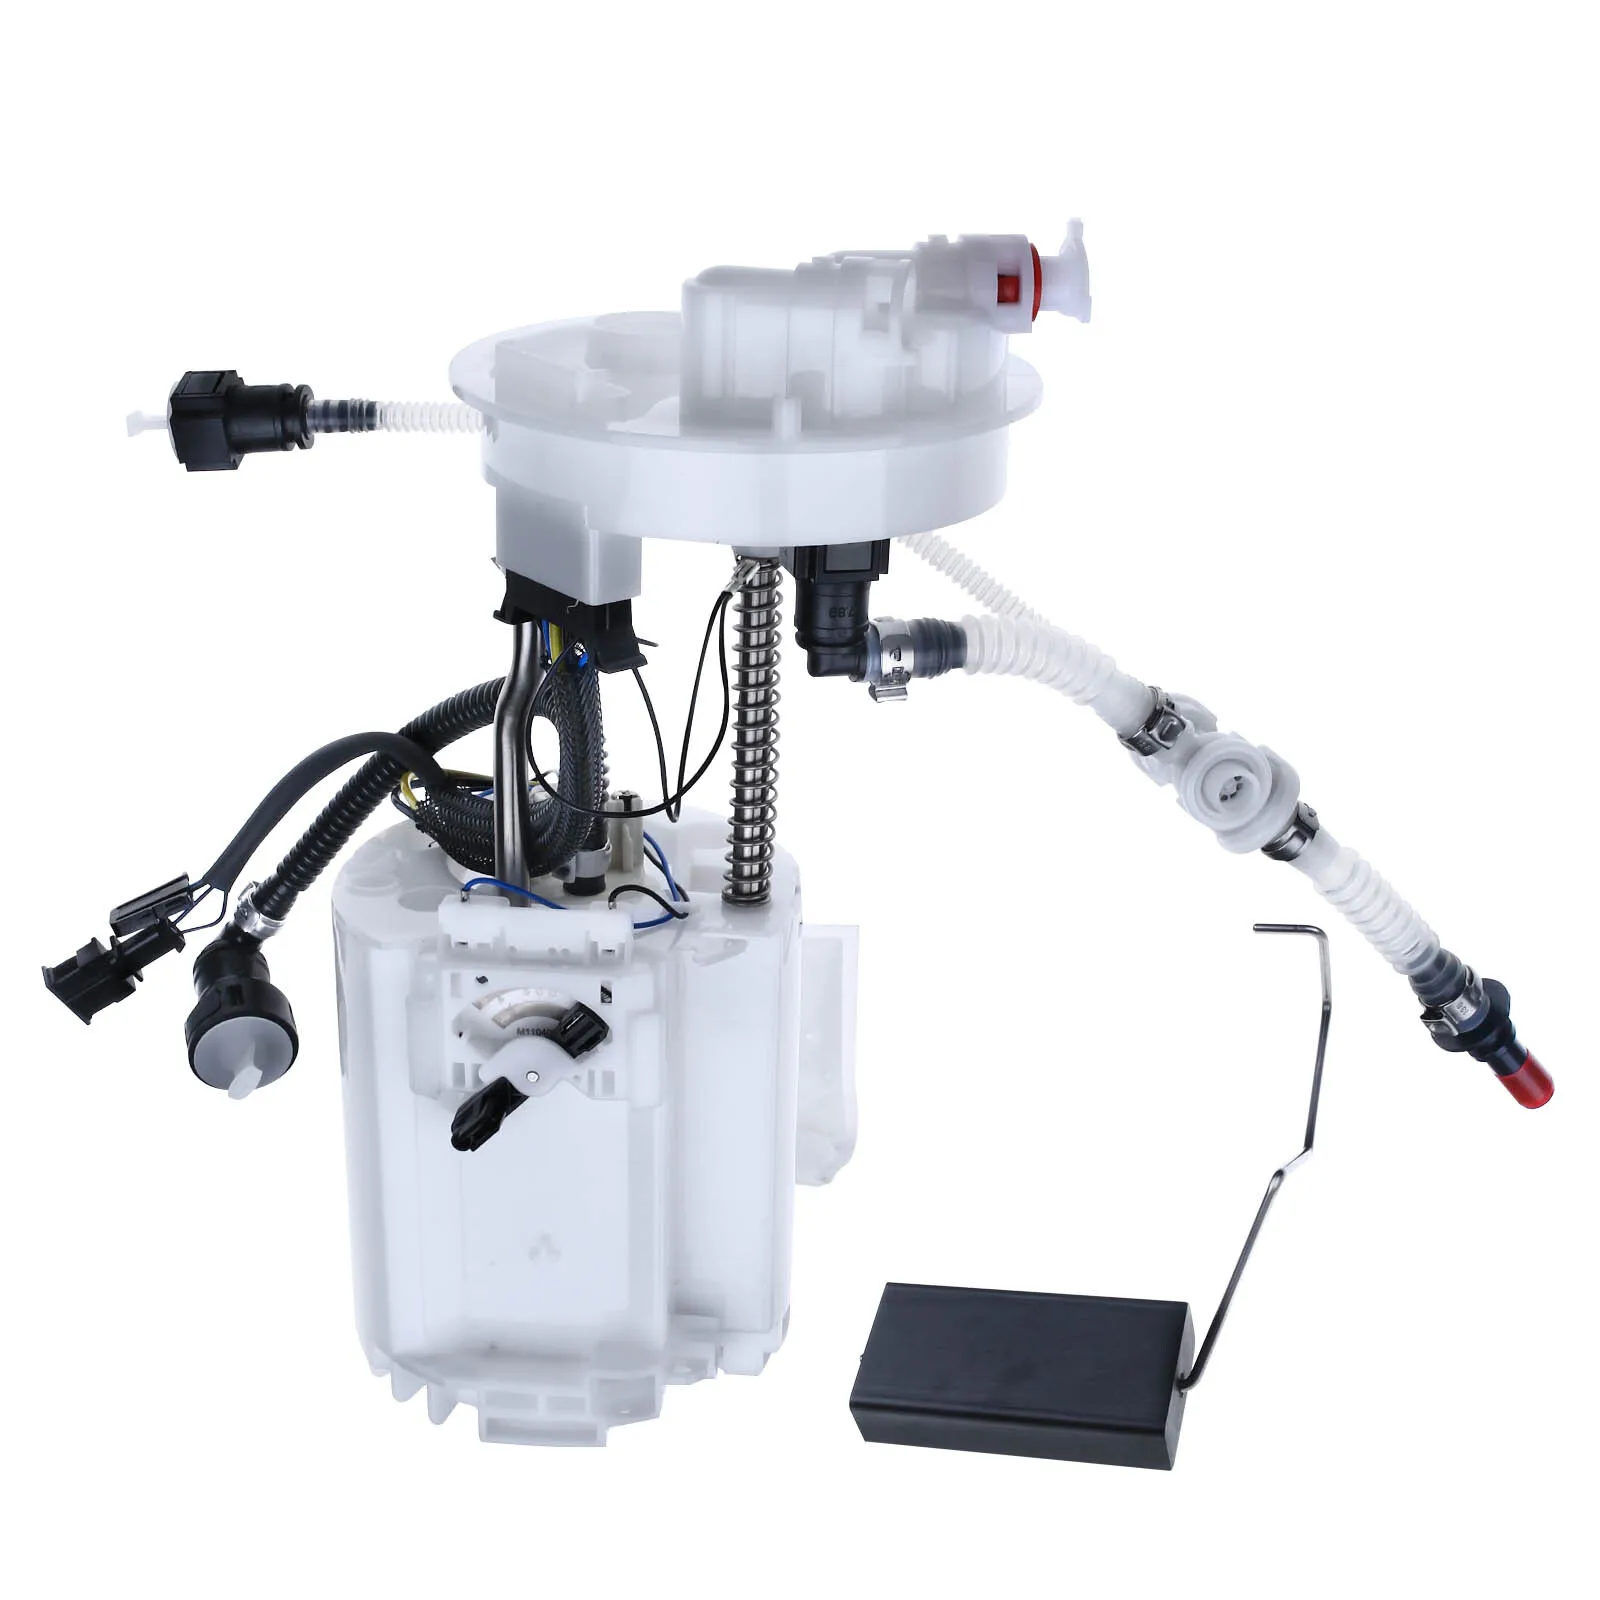 

CN US AU GMR UK Fuel Pump Module Assembly with Sending Unit for Volvo S80 XC60 XC70 3.0L 31274616 312746160